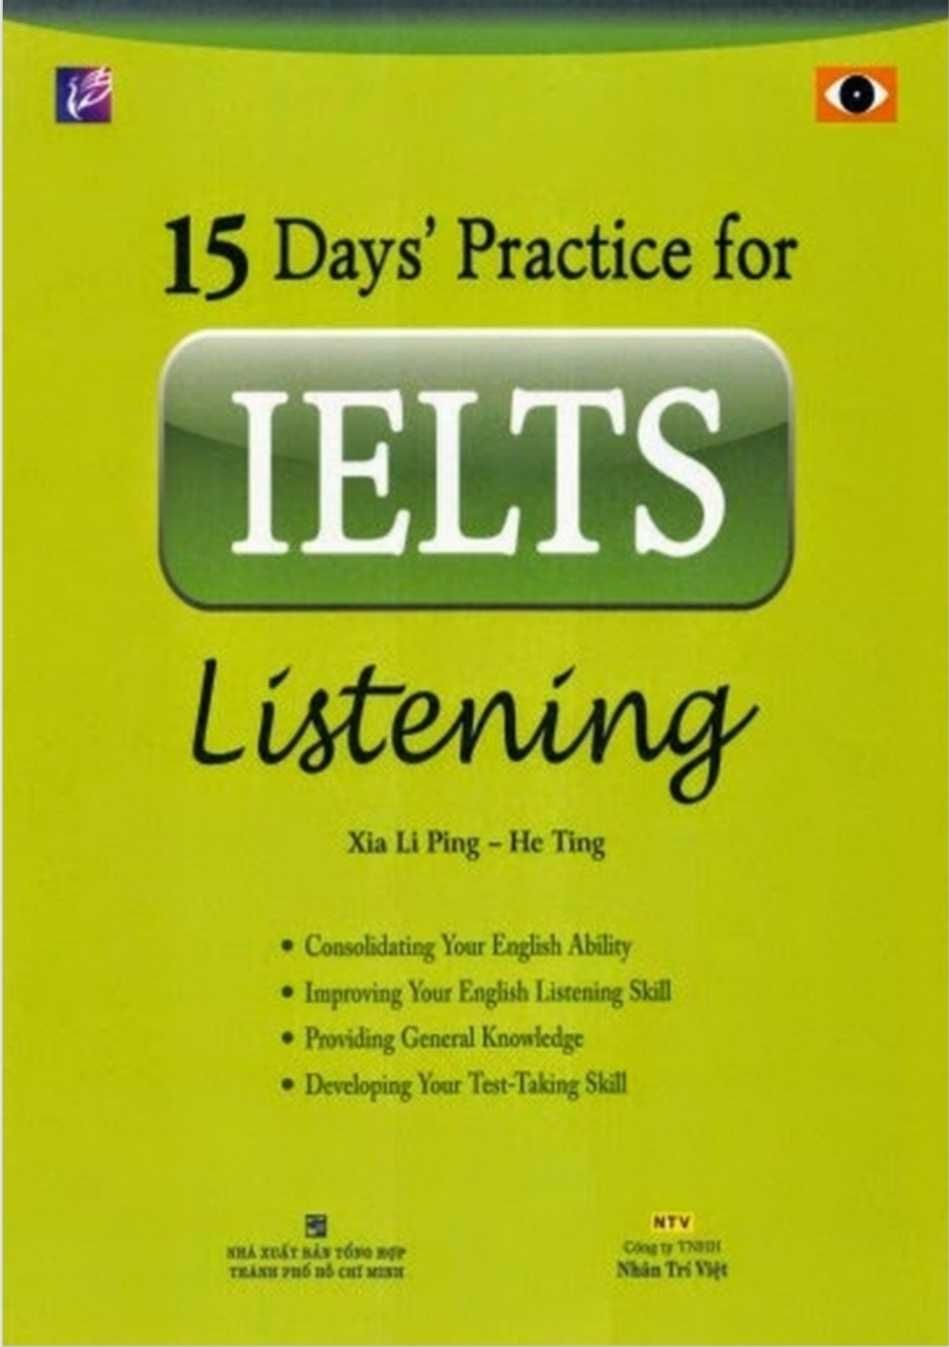 15 Days' practice for Ielts listening, reading, speaking, writing